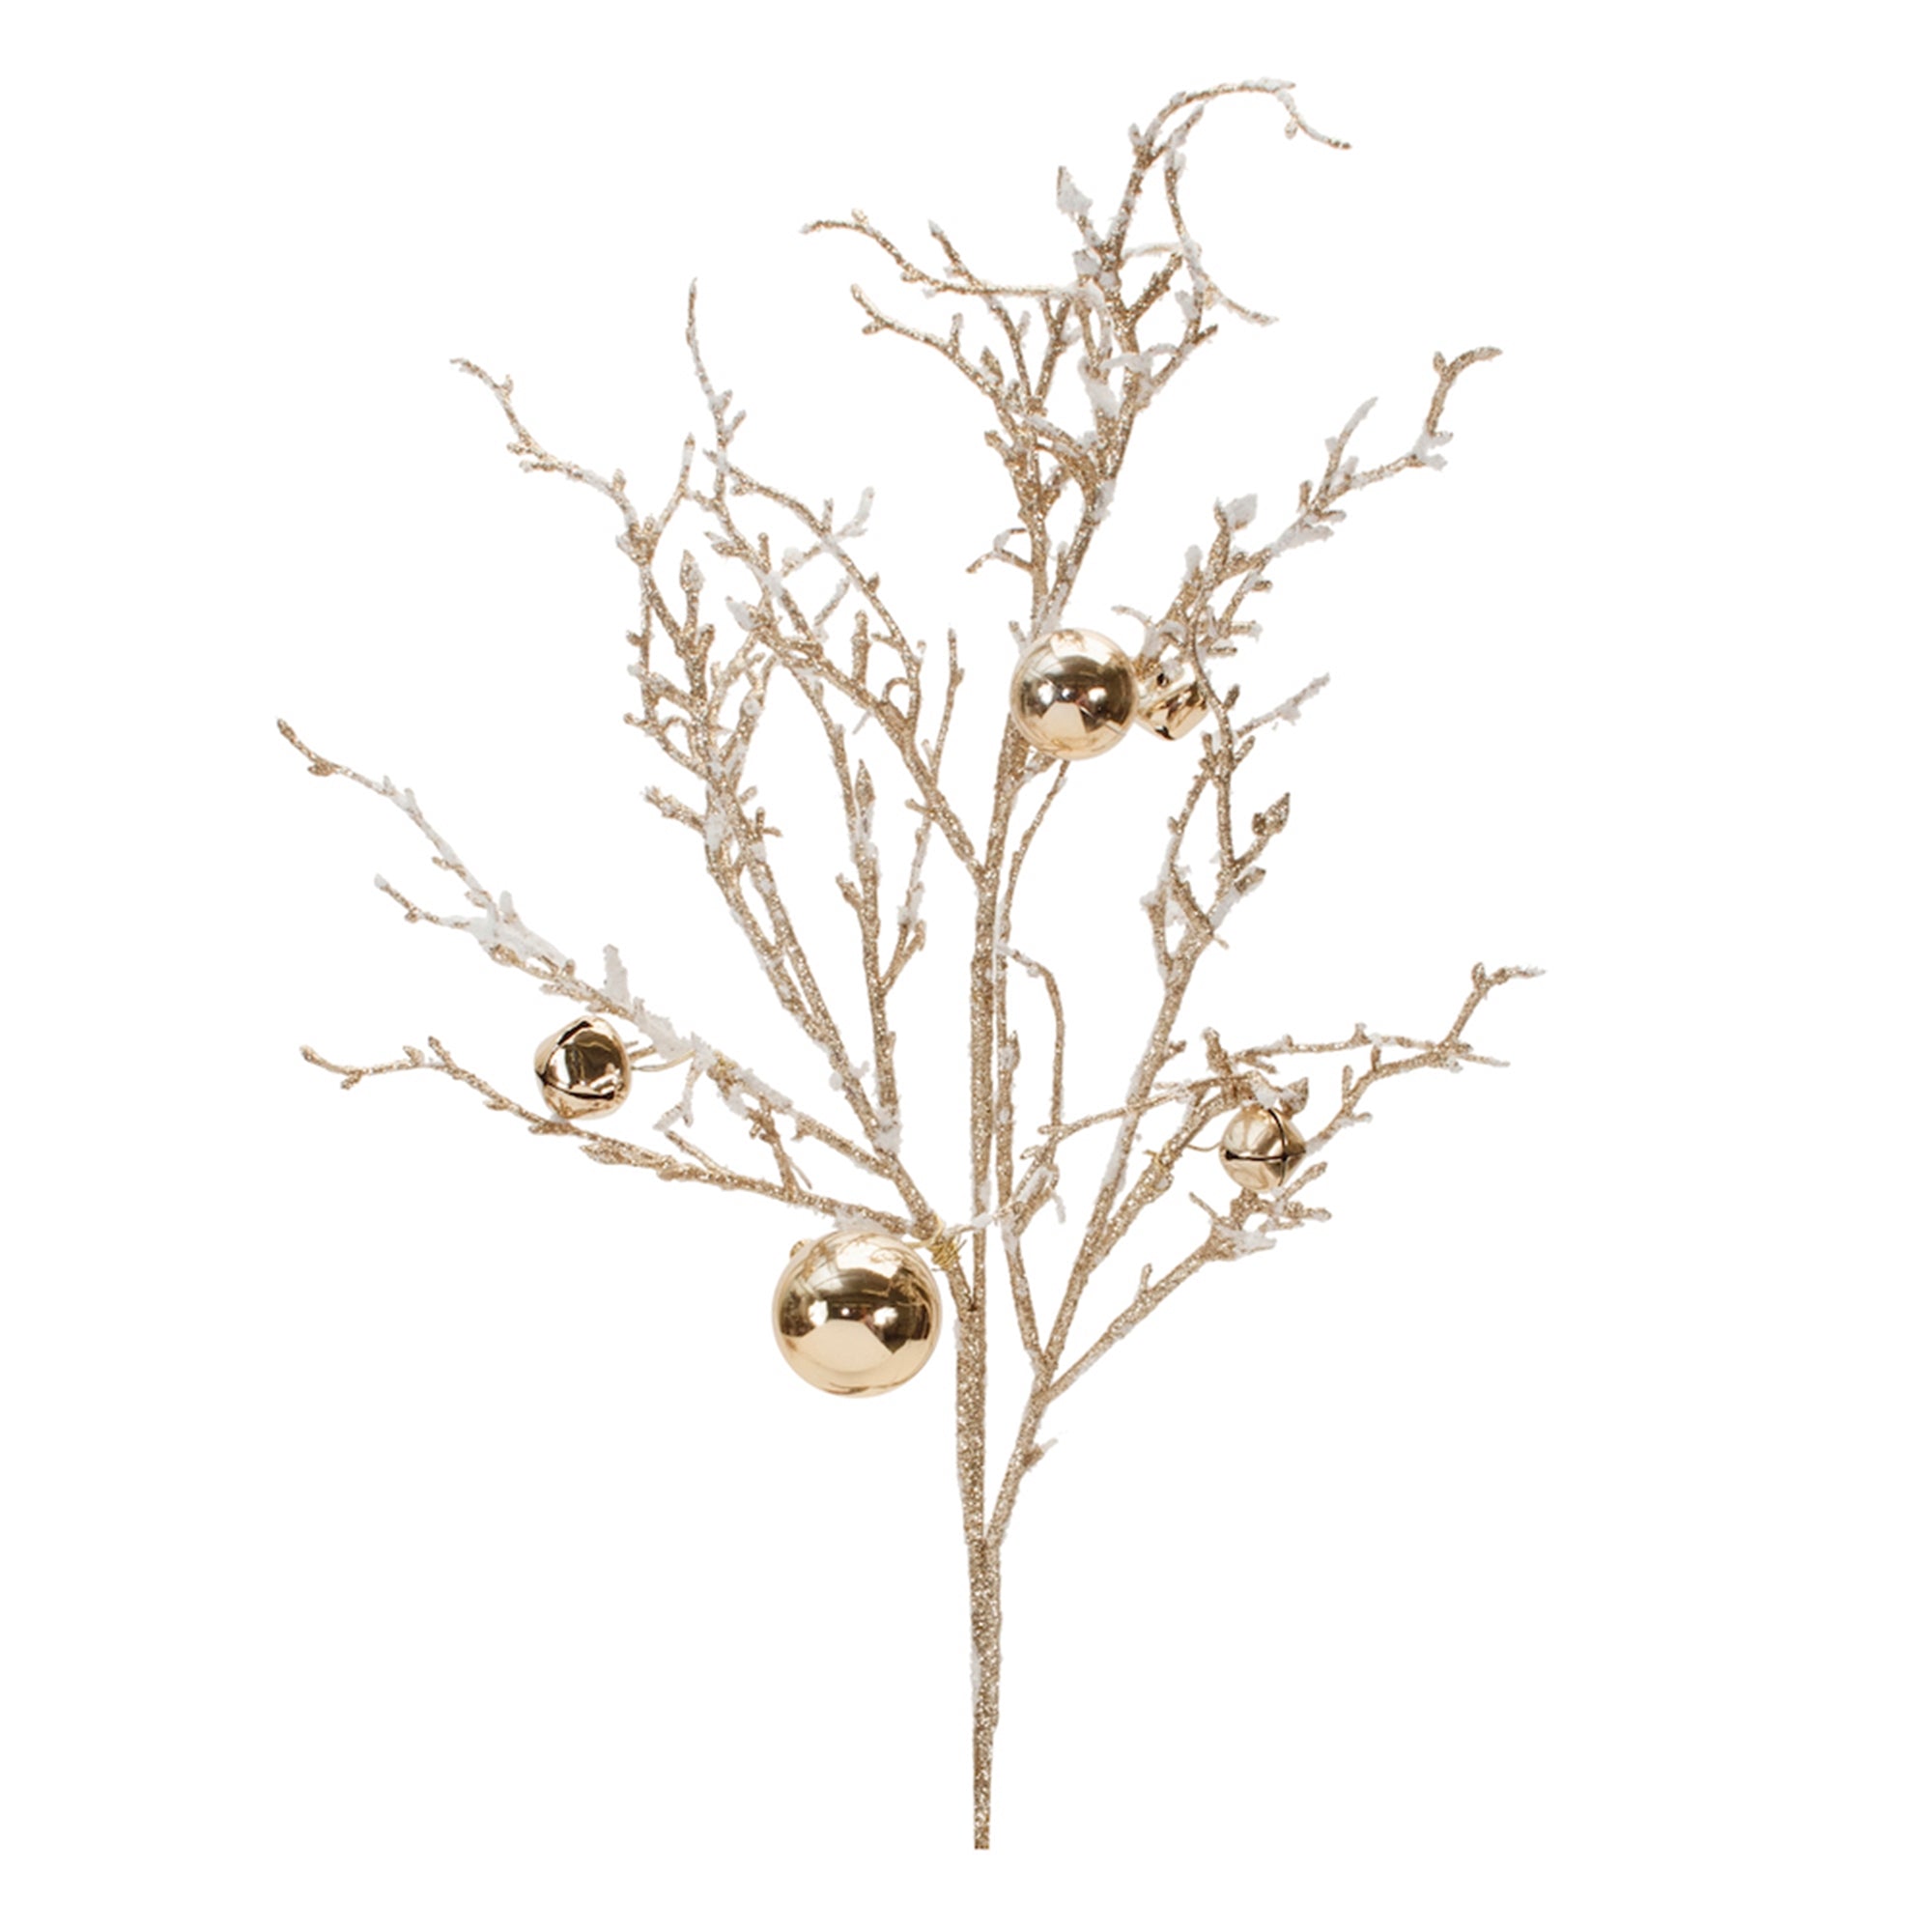 Flocked Twig Branch with Sleigh Bells (Set of 6)